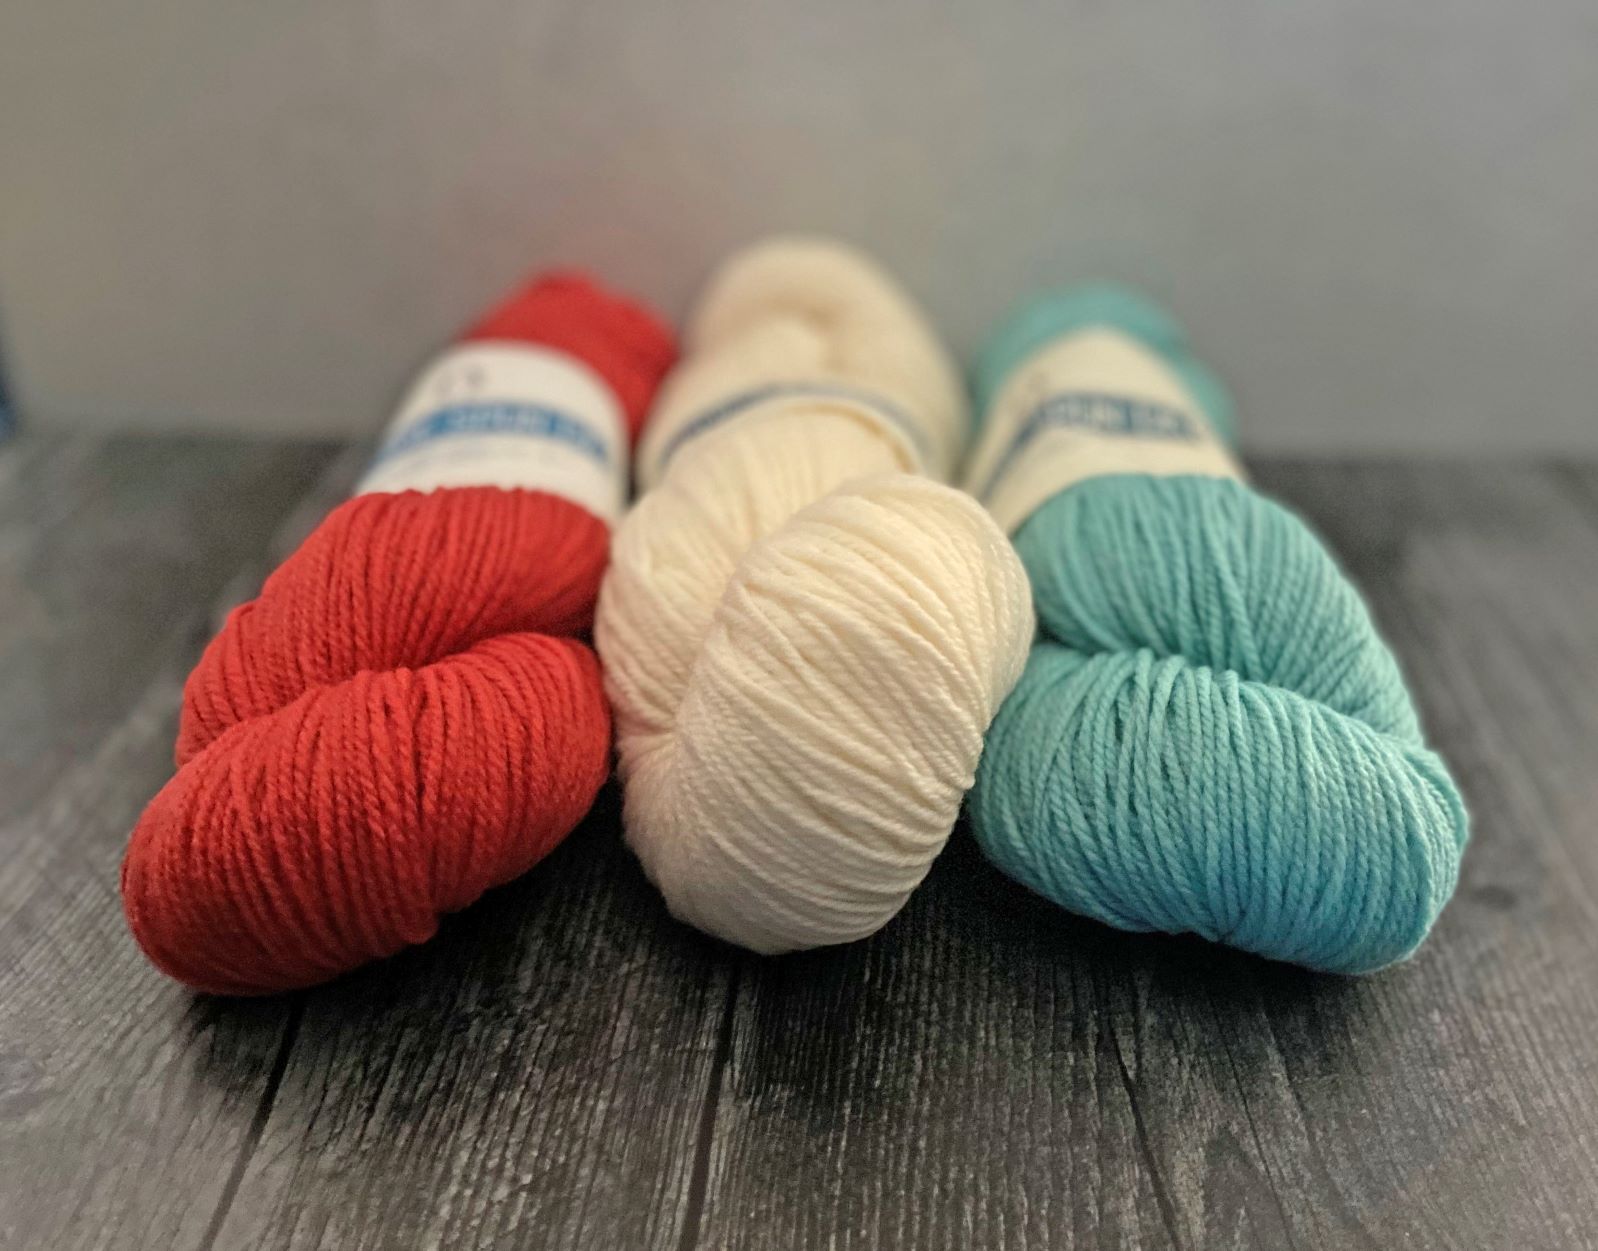 A Detailed Review of Bernat Big Ball Baby Sport Ombre Yarn